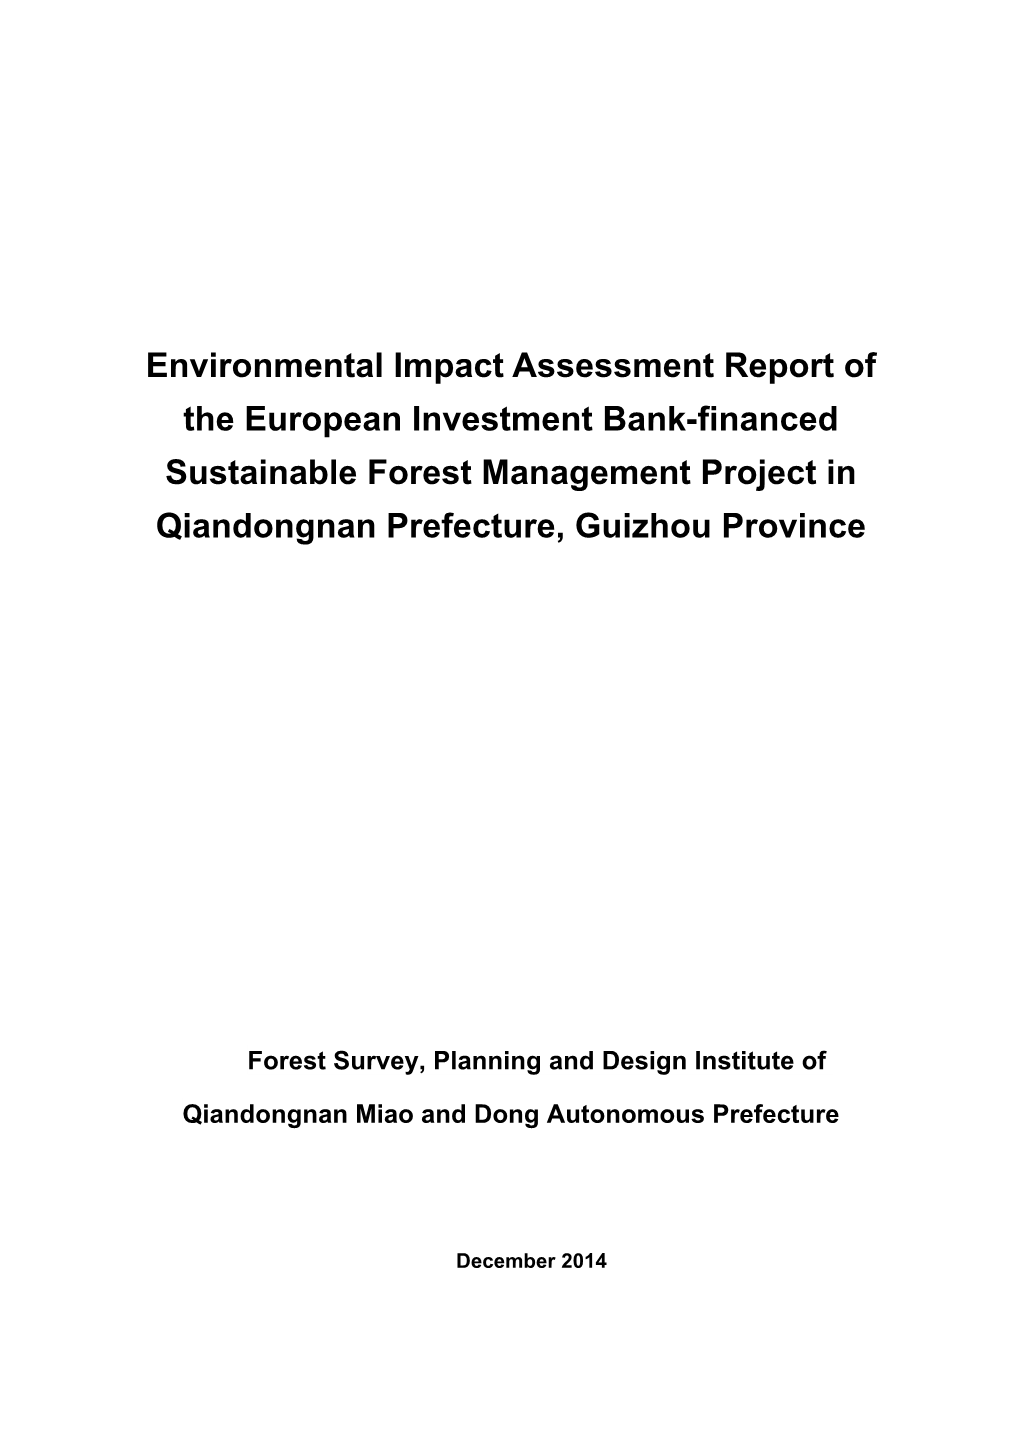 Environmental Impact Assessment Report of the European Investment Bank-Financed Sustainable Forest Management Project in Qiandongnan Prefecture, Guizhou Province